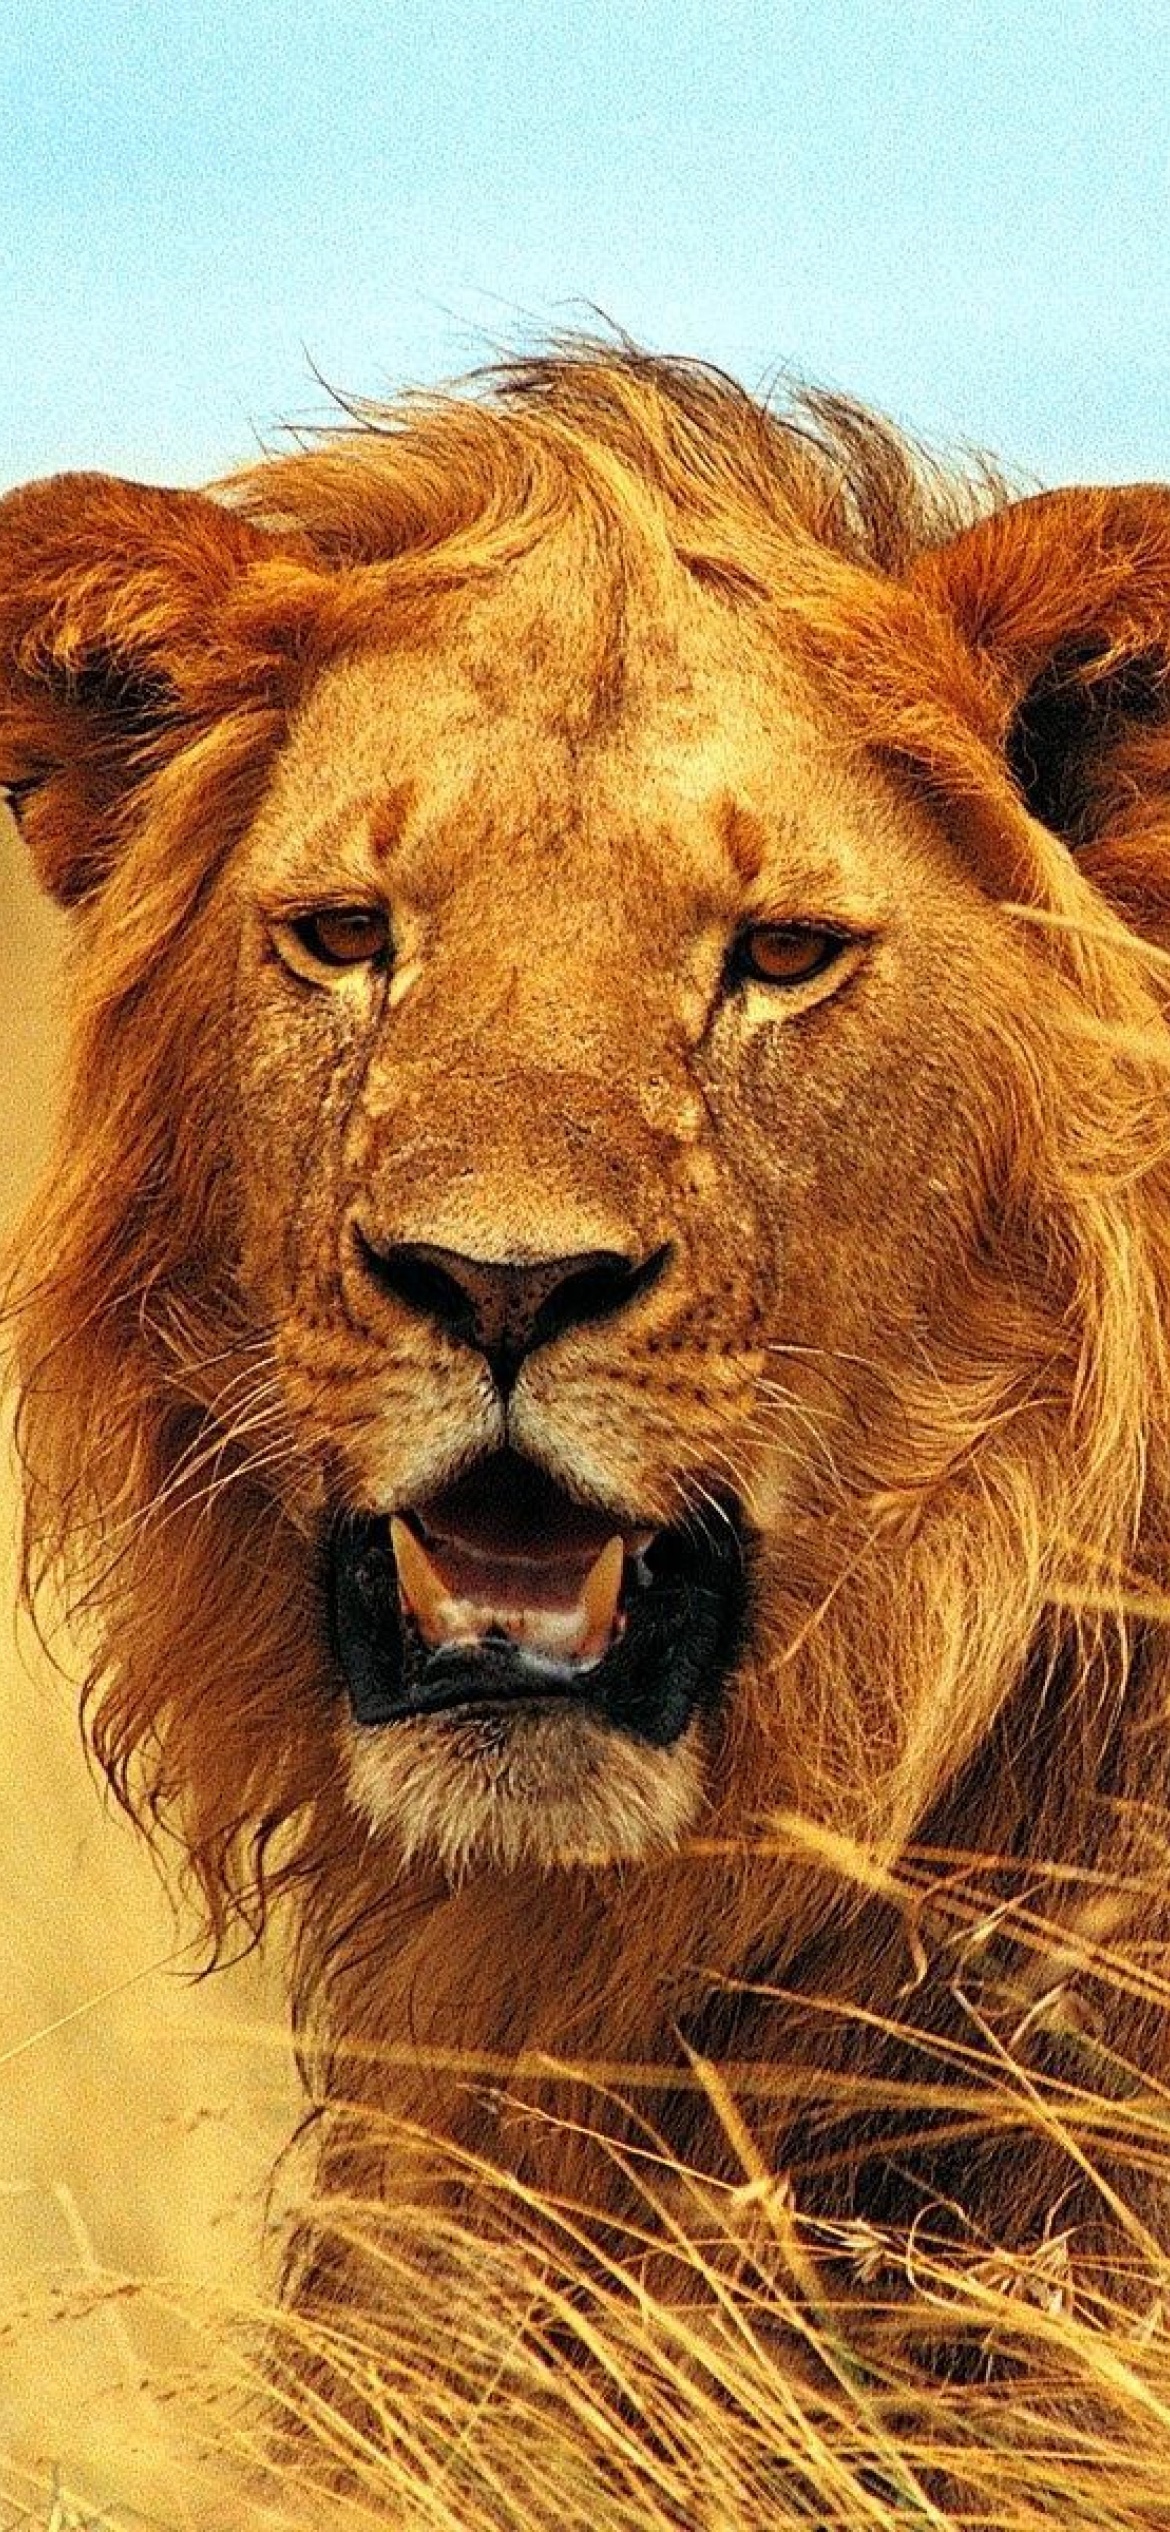 Lion 4K Ultra HD Wallpaper for iPhone 12 Pro